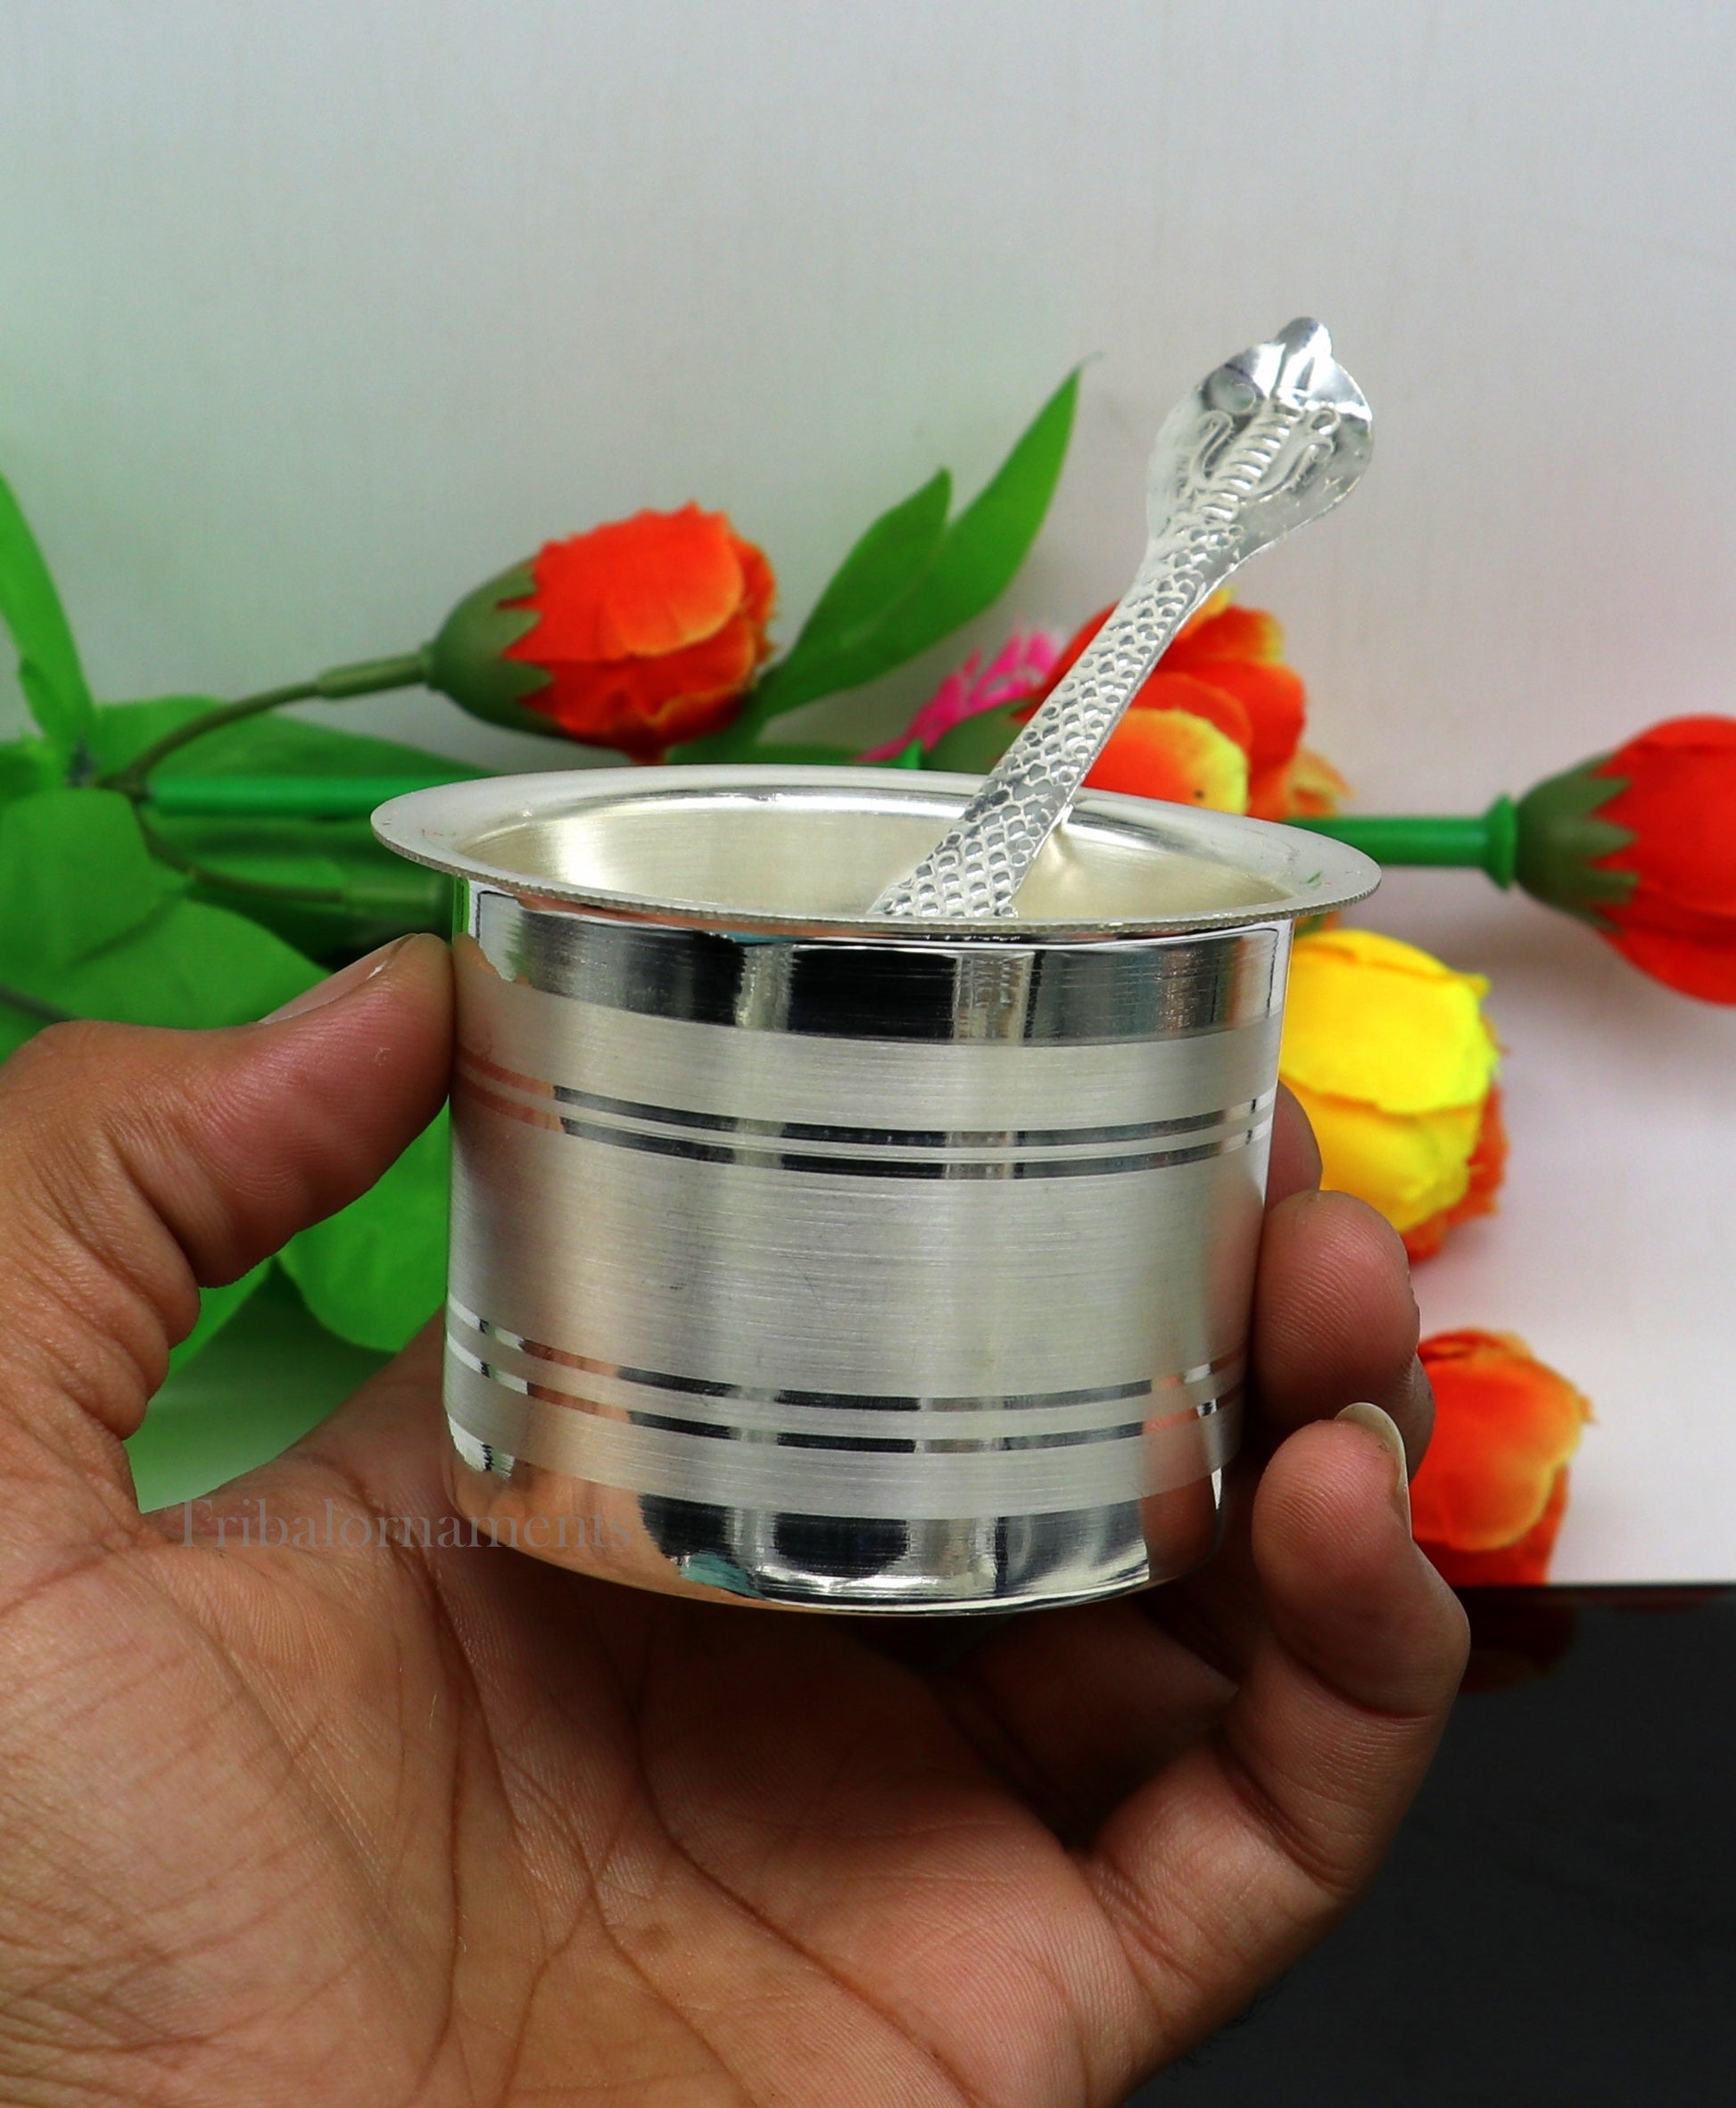 Silver Elegant Ghee pot patra puja or worshipping silver ghee bowl or pot, Butter pot for kitchen, silver puja utensils from India su542 - TRIBAL ORNAMENTS